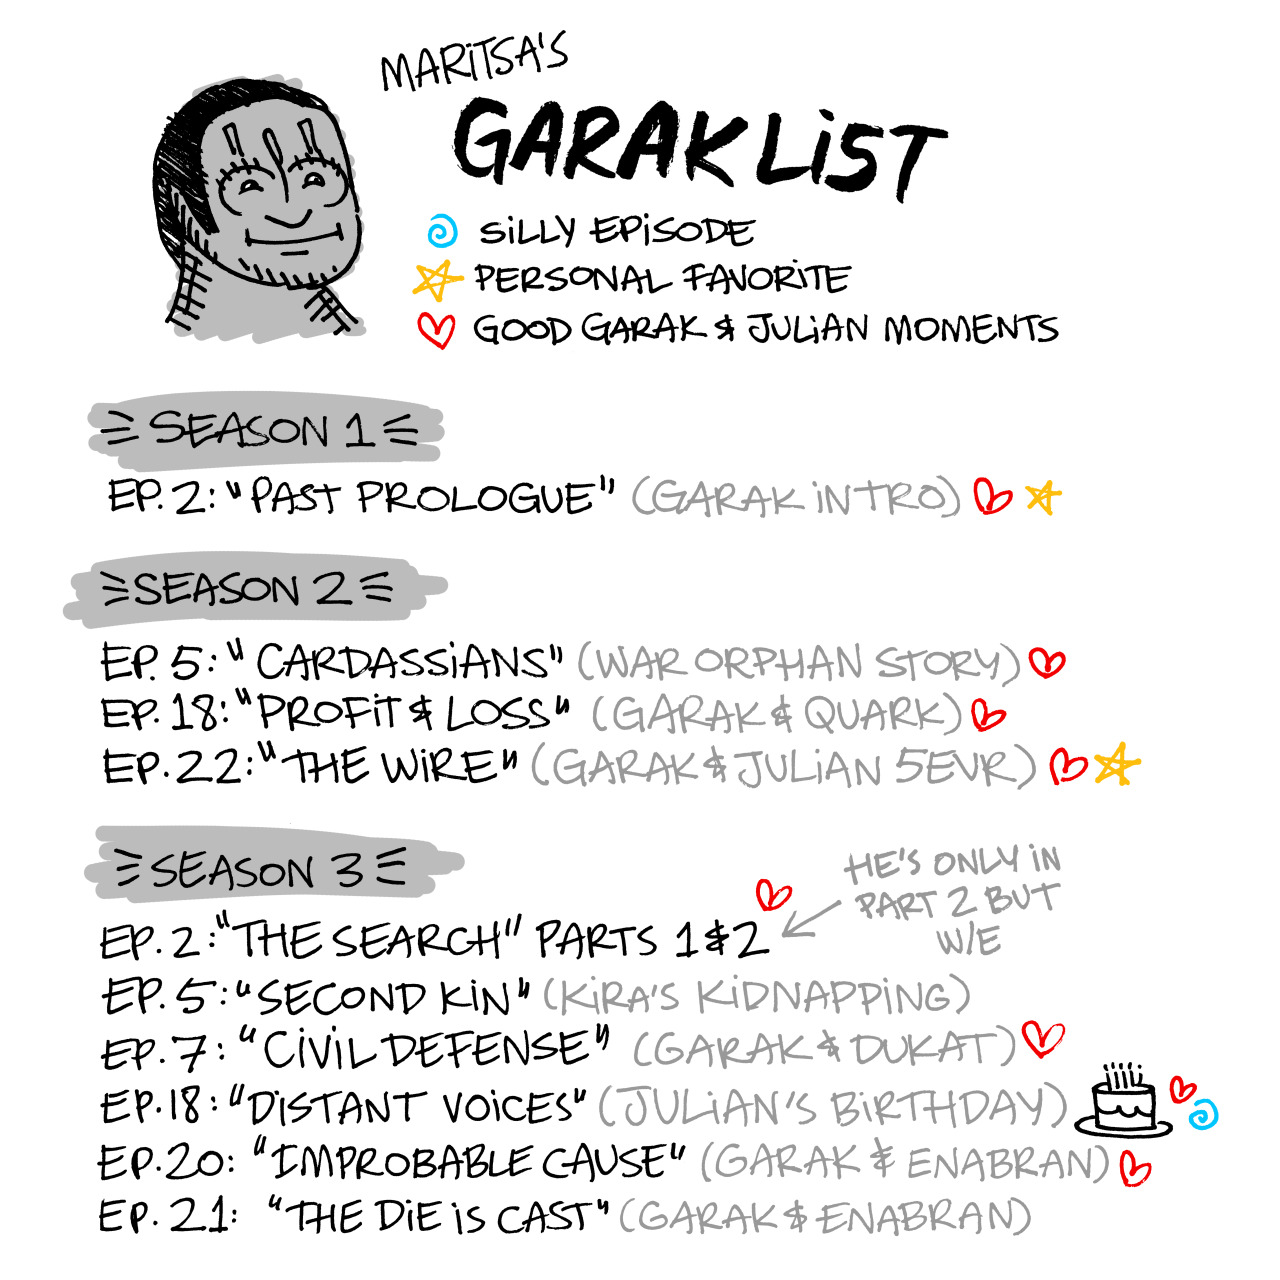 I recently did a Garak run of DS9 where I only watch the Garak episodes, and my friend Rebecca asked me to put together a list of the best ones for her to watch (with a special emphasis on the...